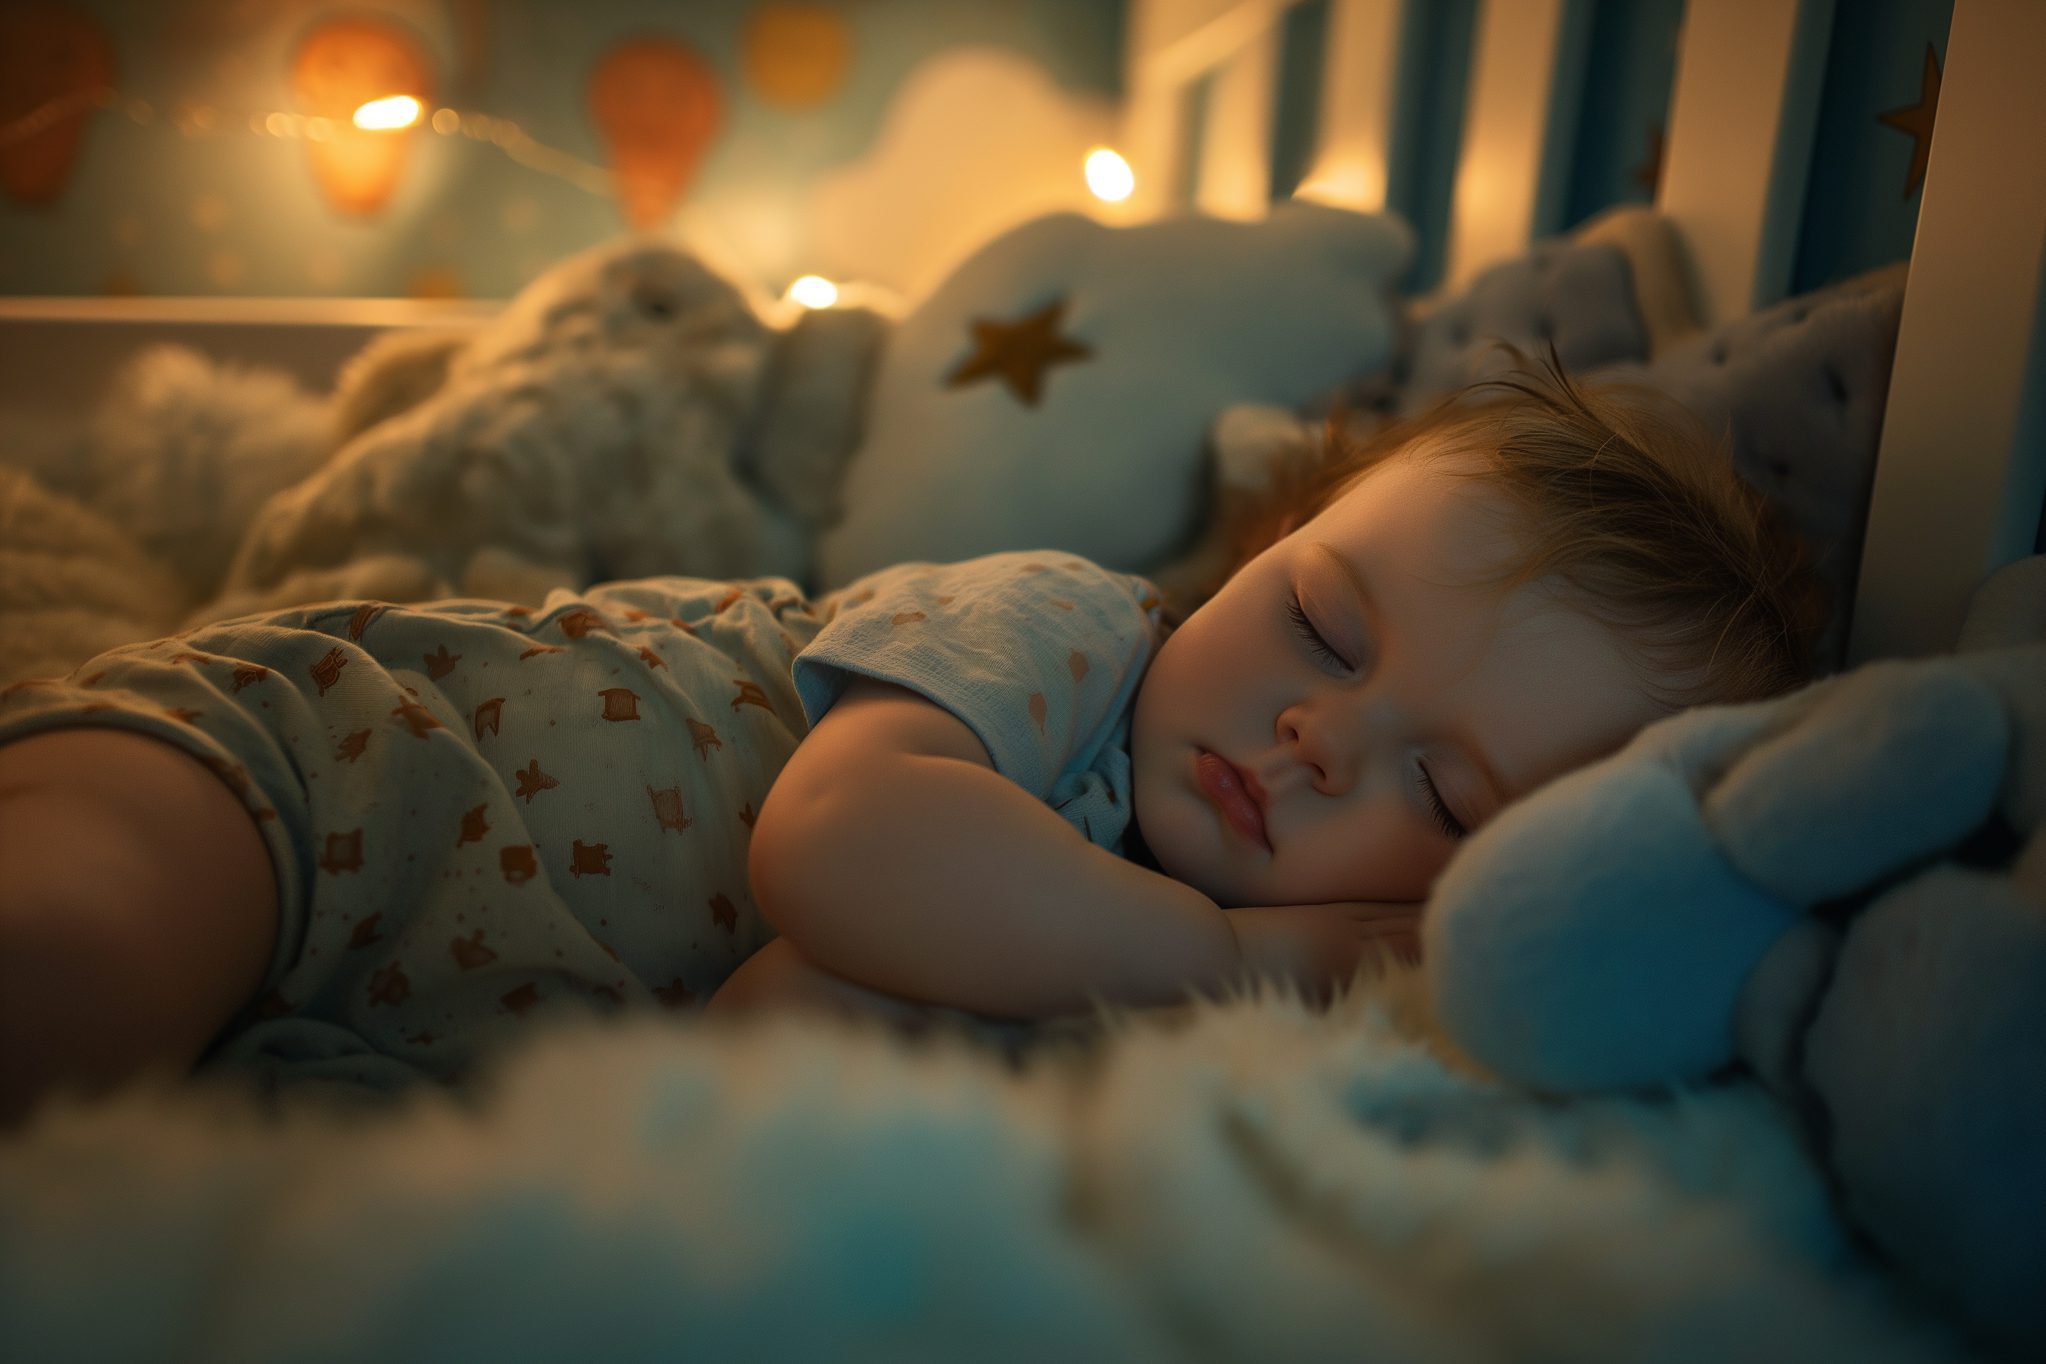 White Noise and Sleep Training for Babies: Does It Help?